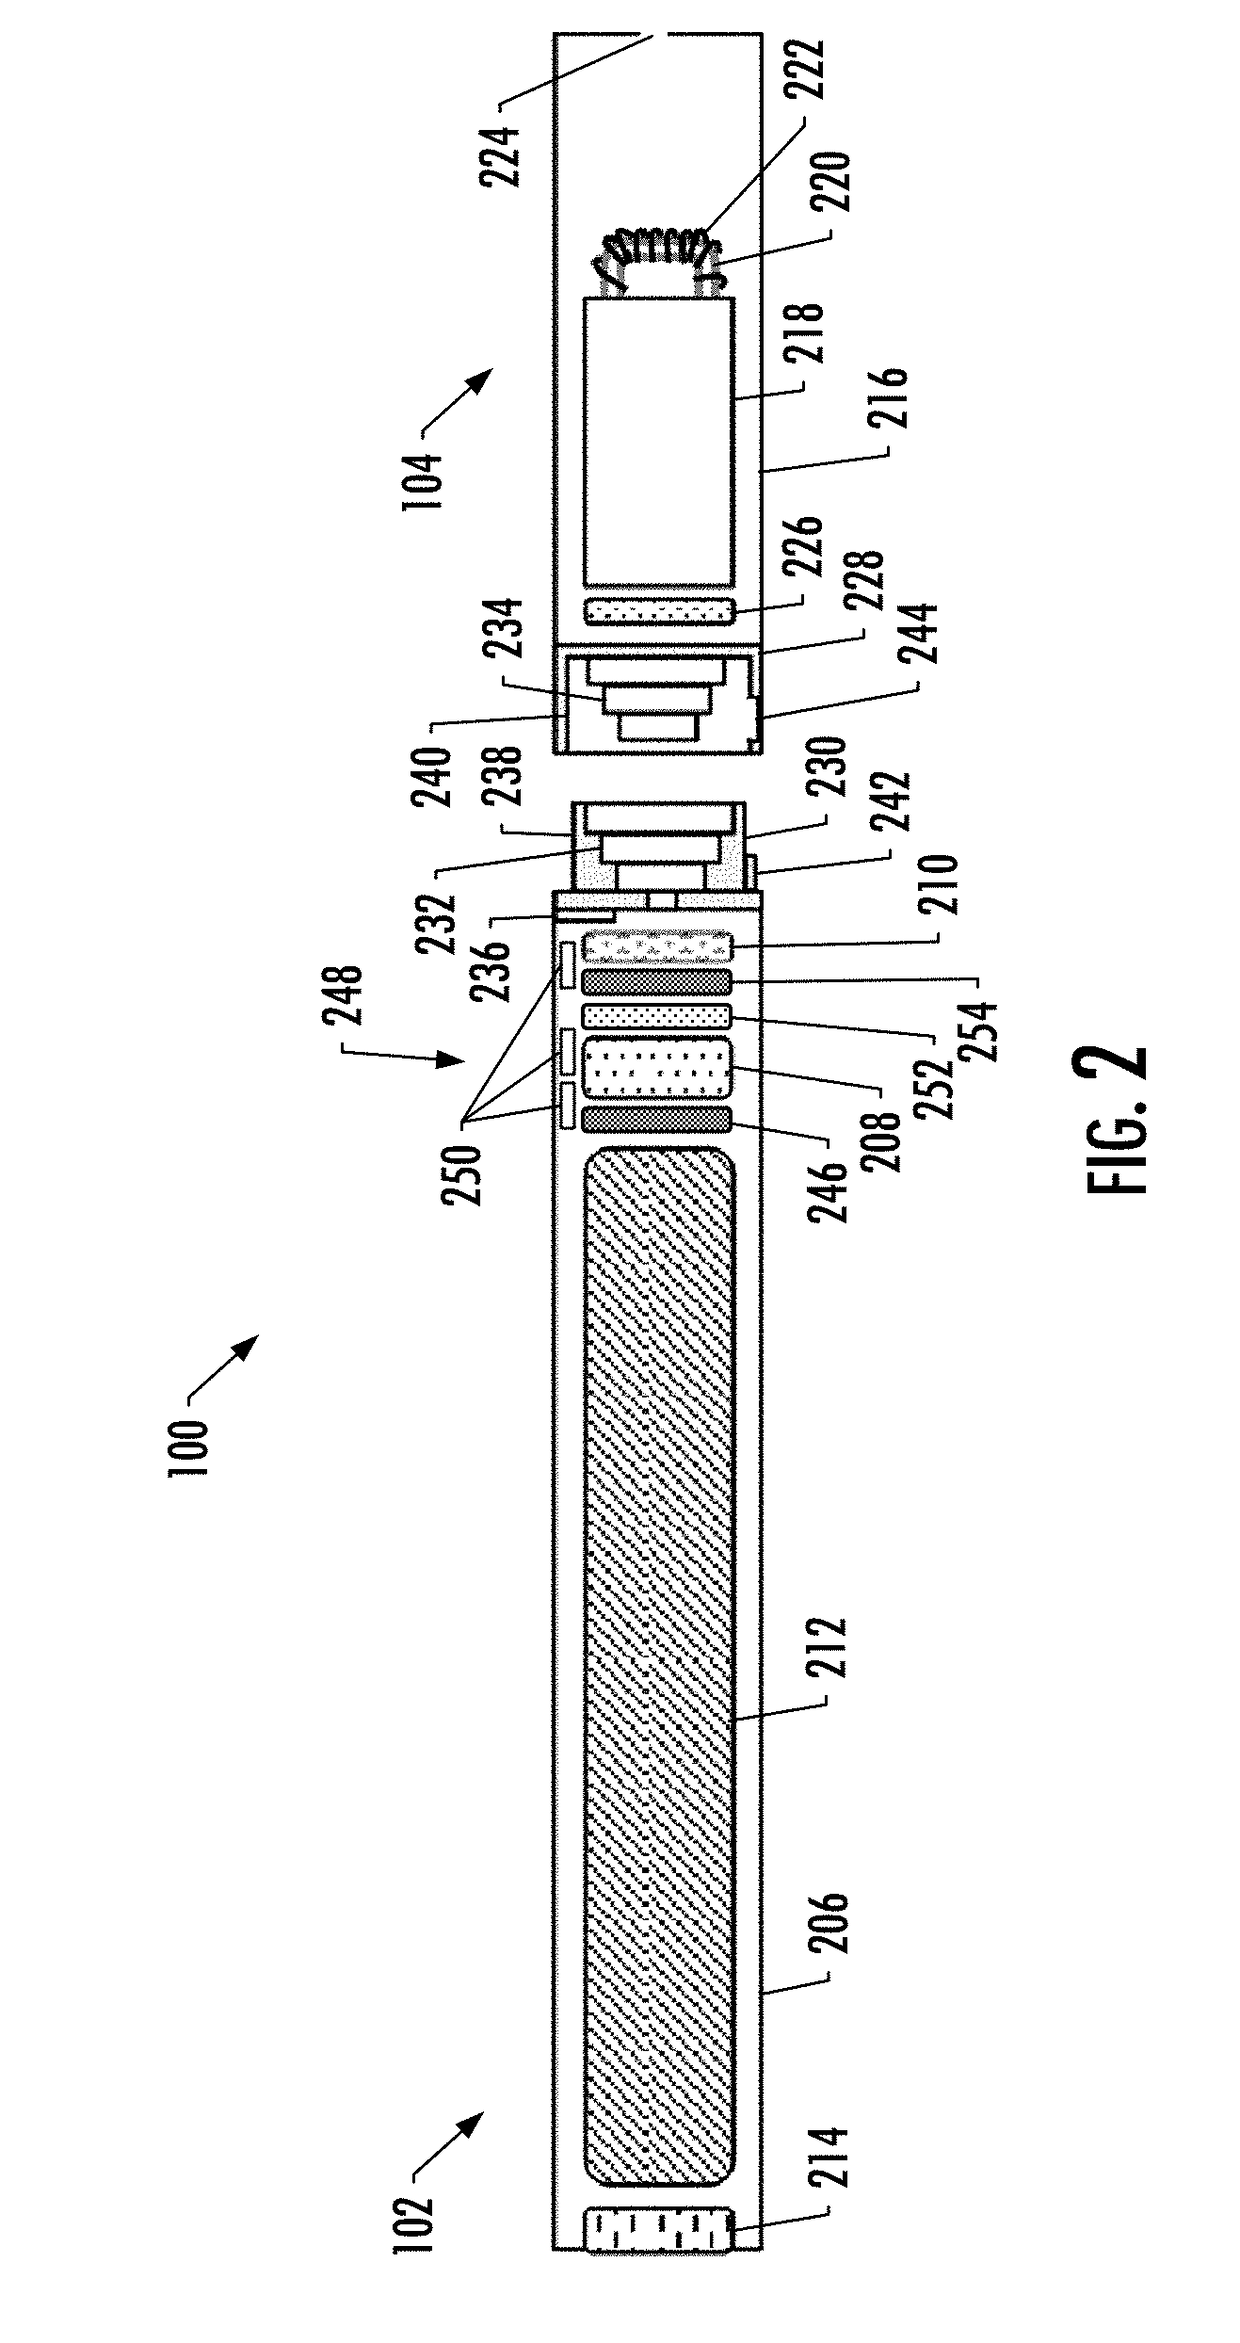 Heart rate monitor for an aerosol delivery device